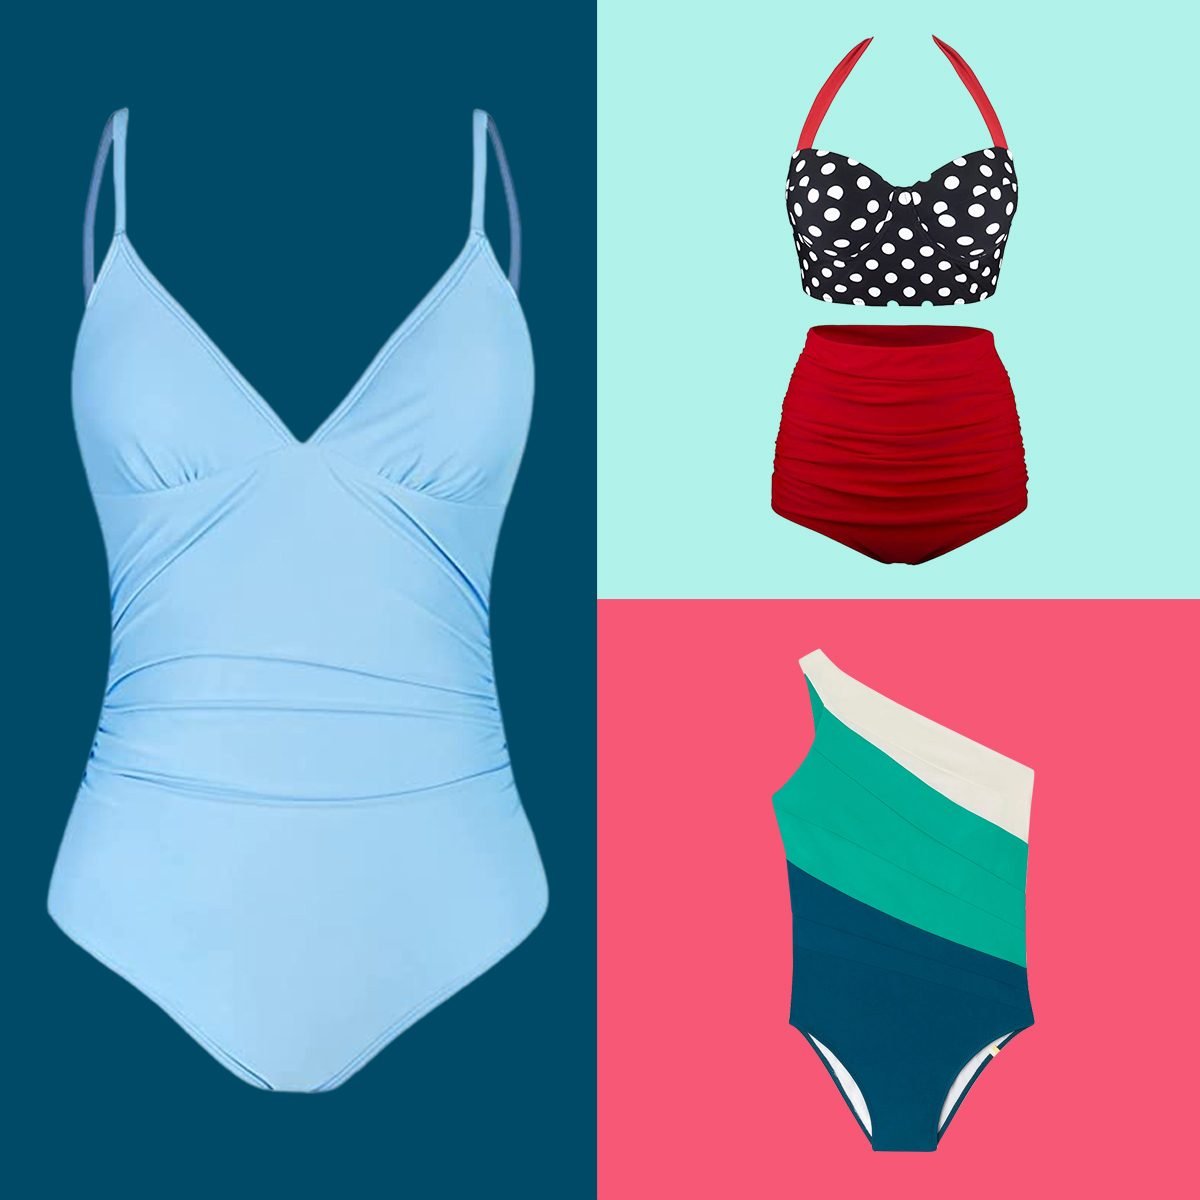 Cupshe Slimming Swimsuit Has Mesh in All the Right Places